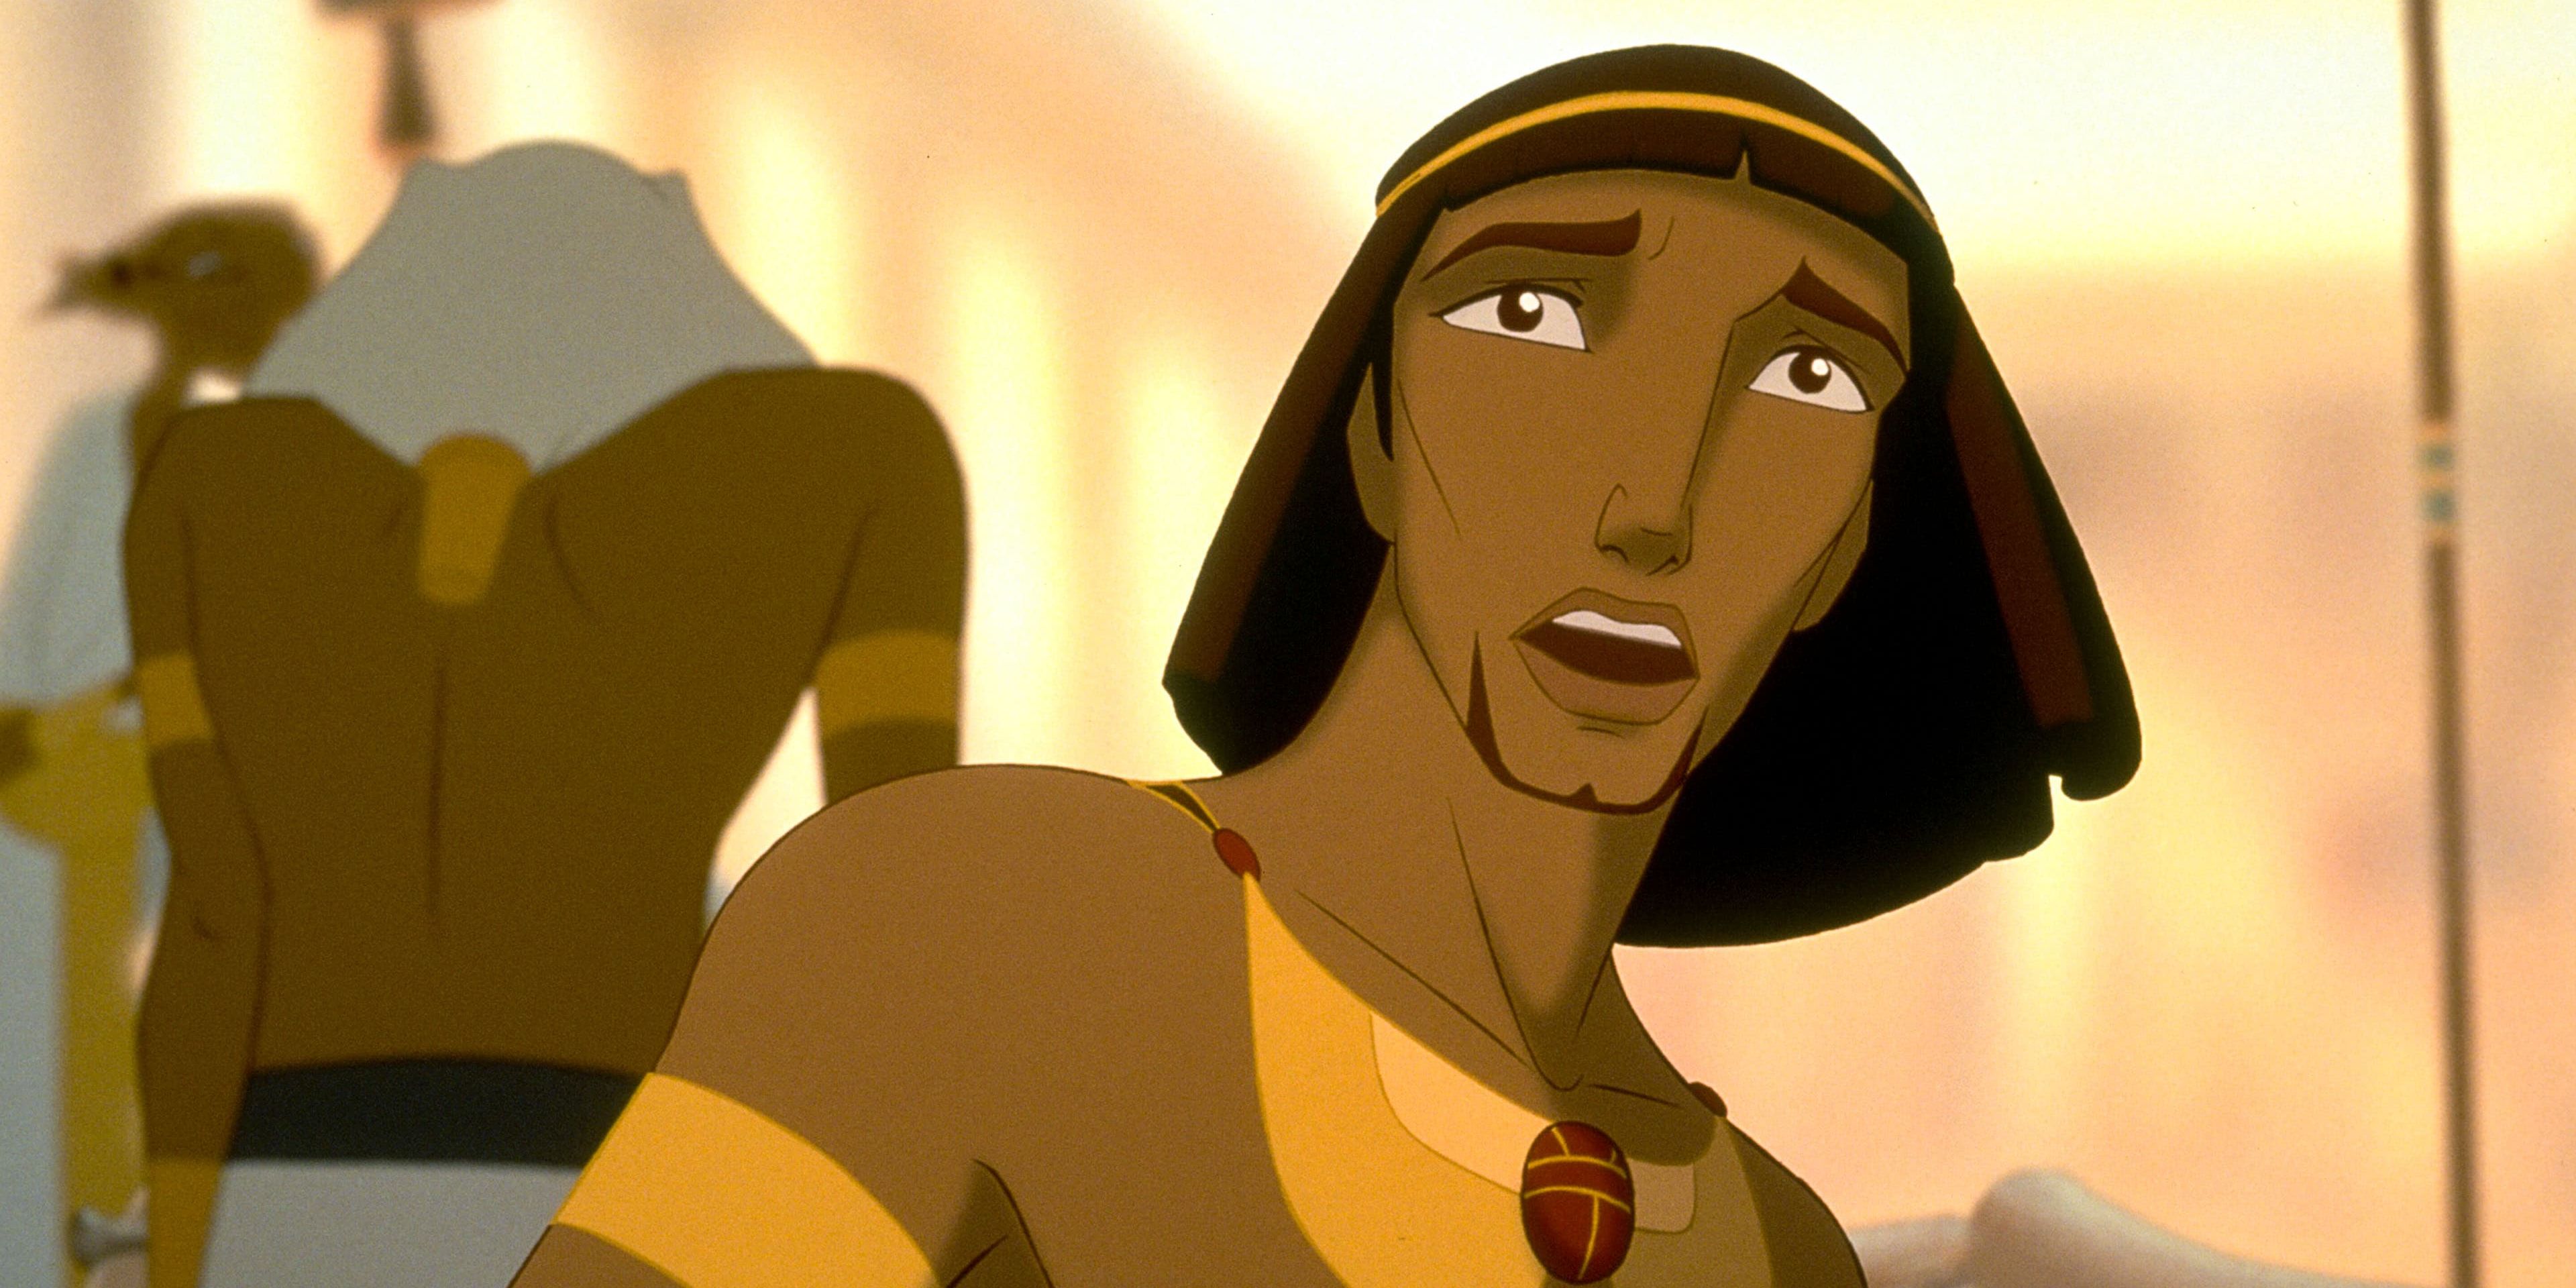 Moses, voiced by Val Kilmer, looking worried in The Prince of Egypt